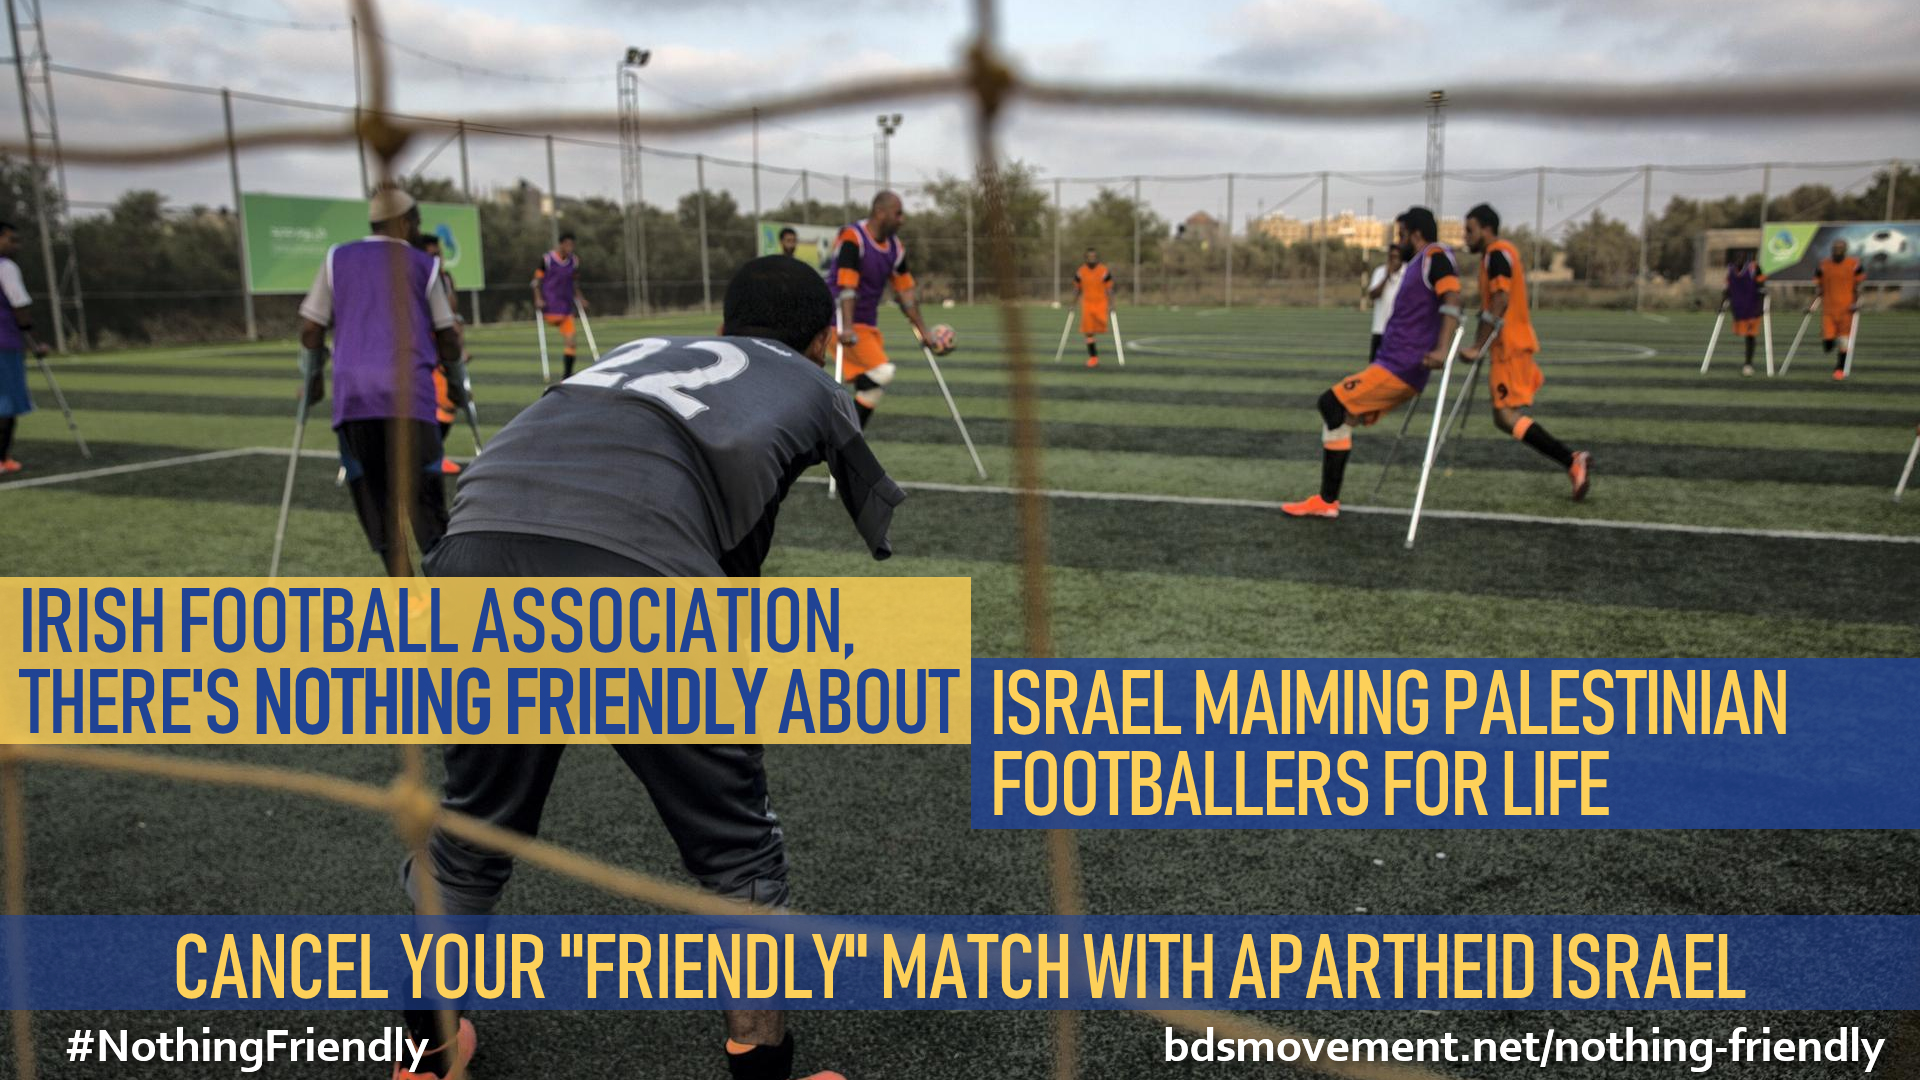 Irish Football Assoc, there's nothing friendly about maiming Palestinian footballers